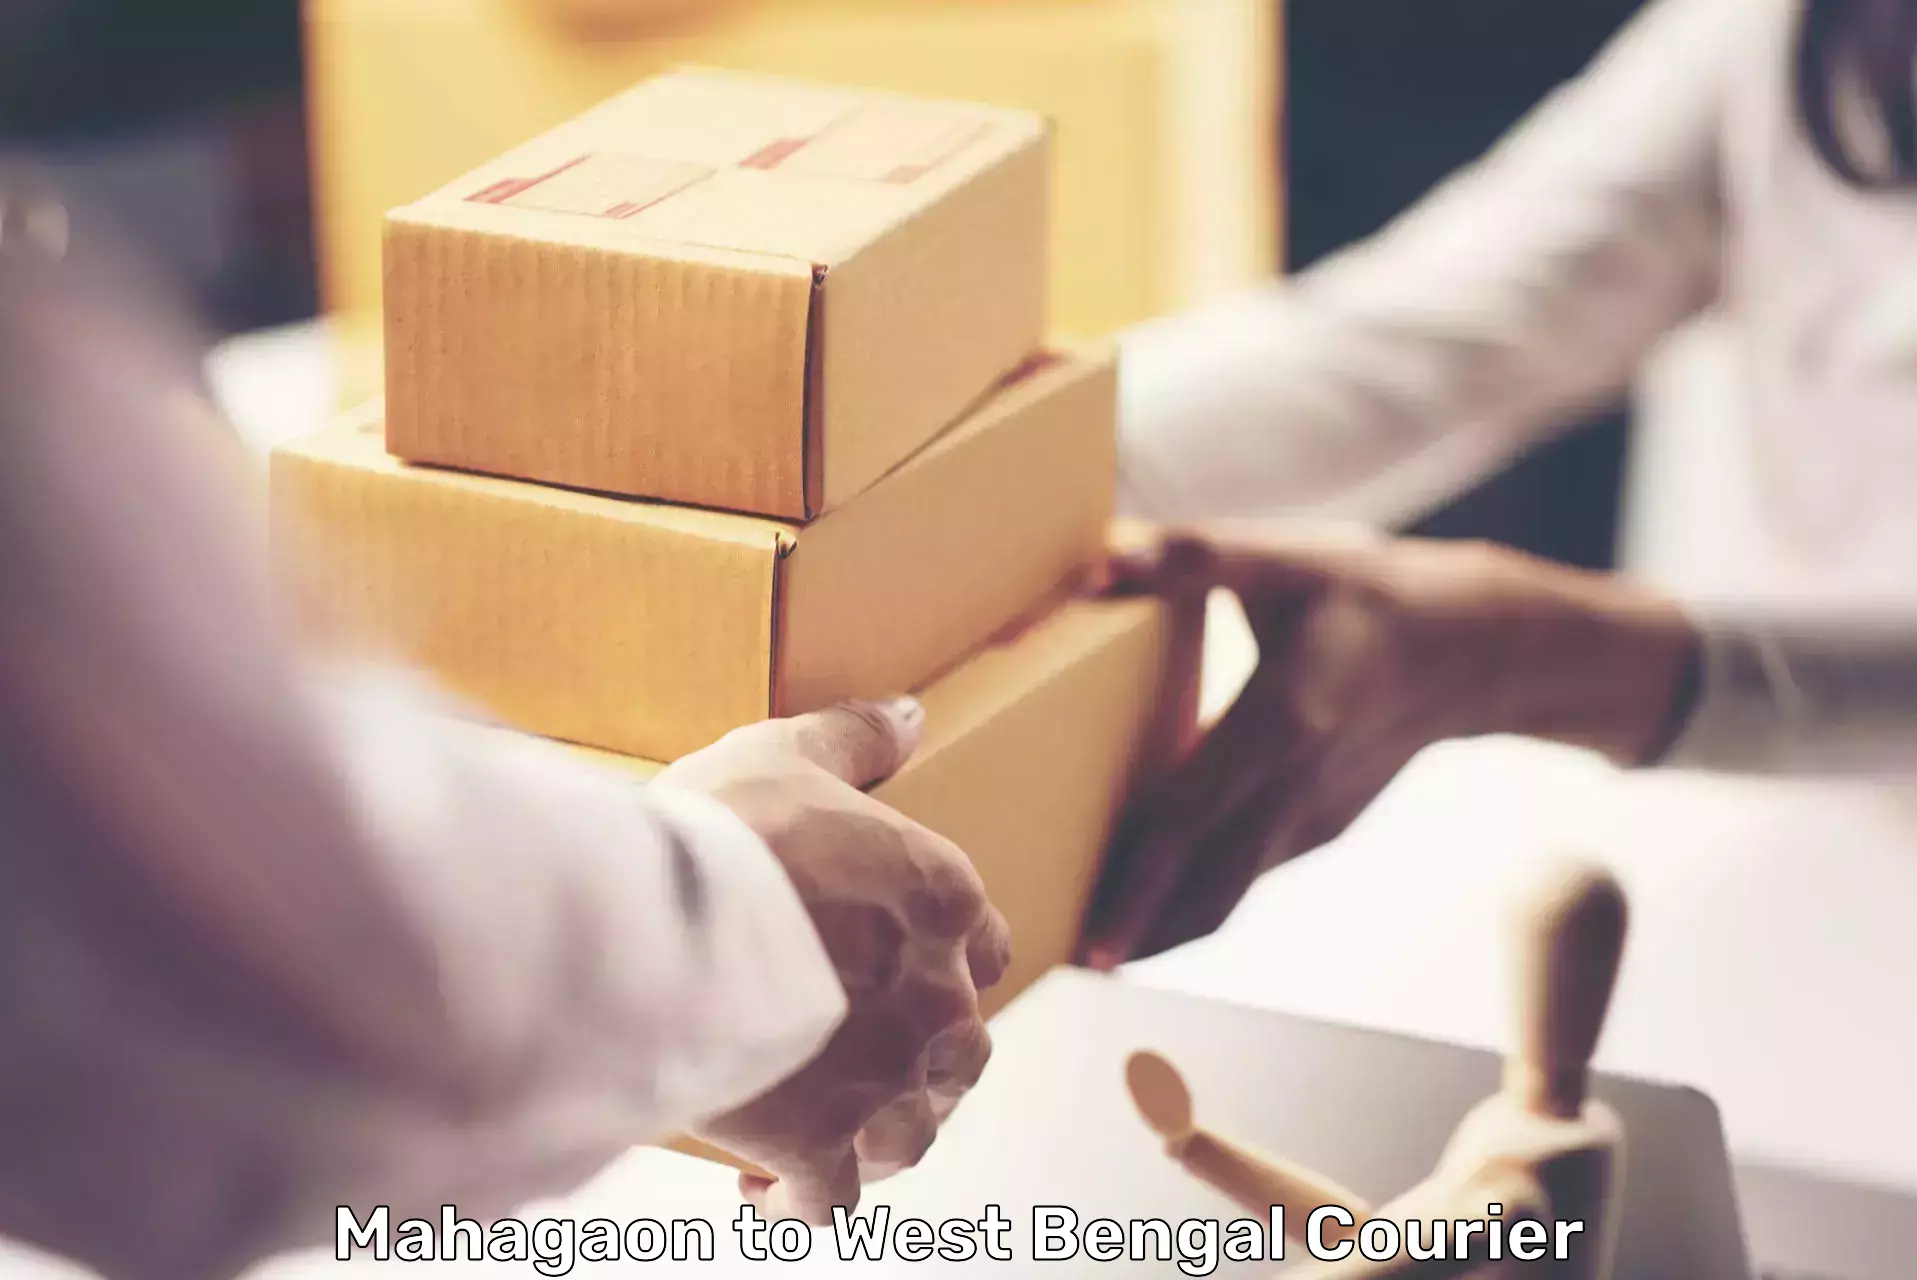 State-of-the-art courier technology Mahagaon to Kaliachak